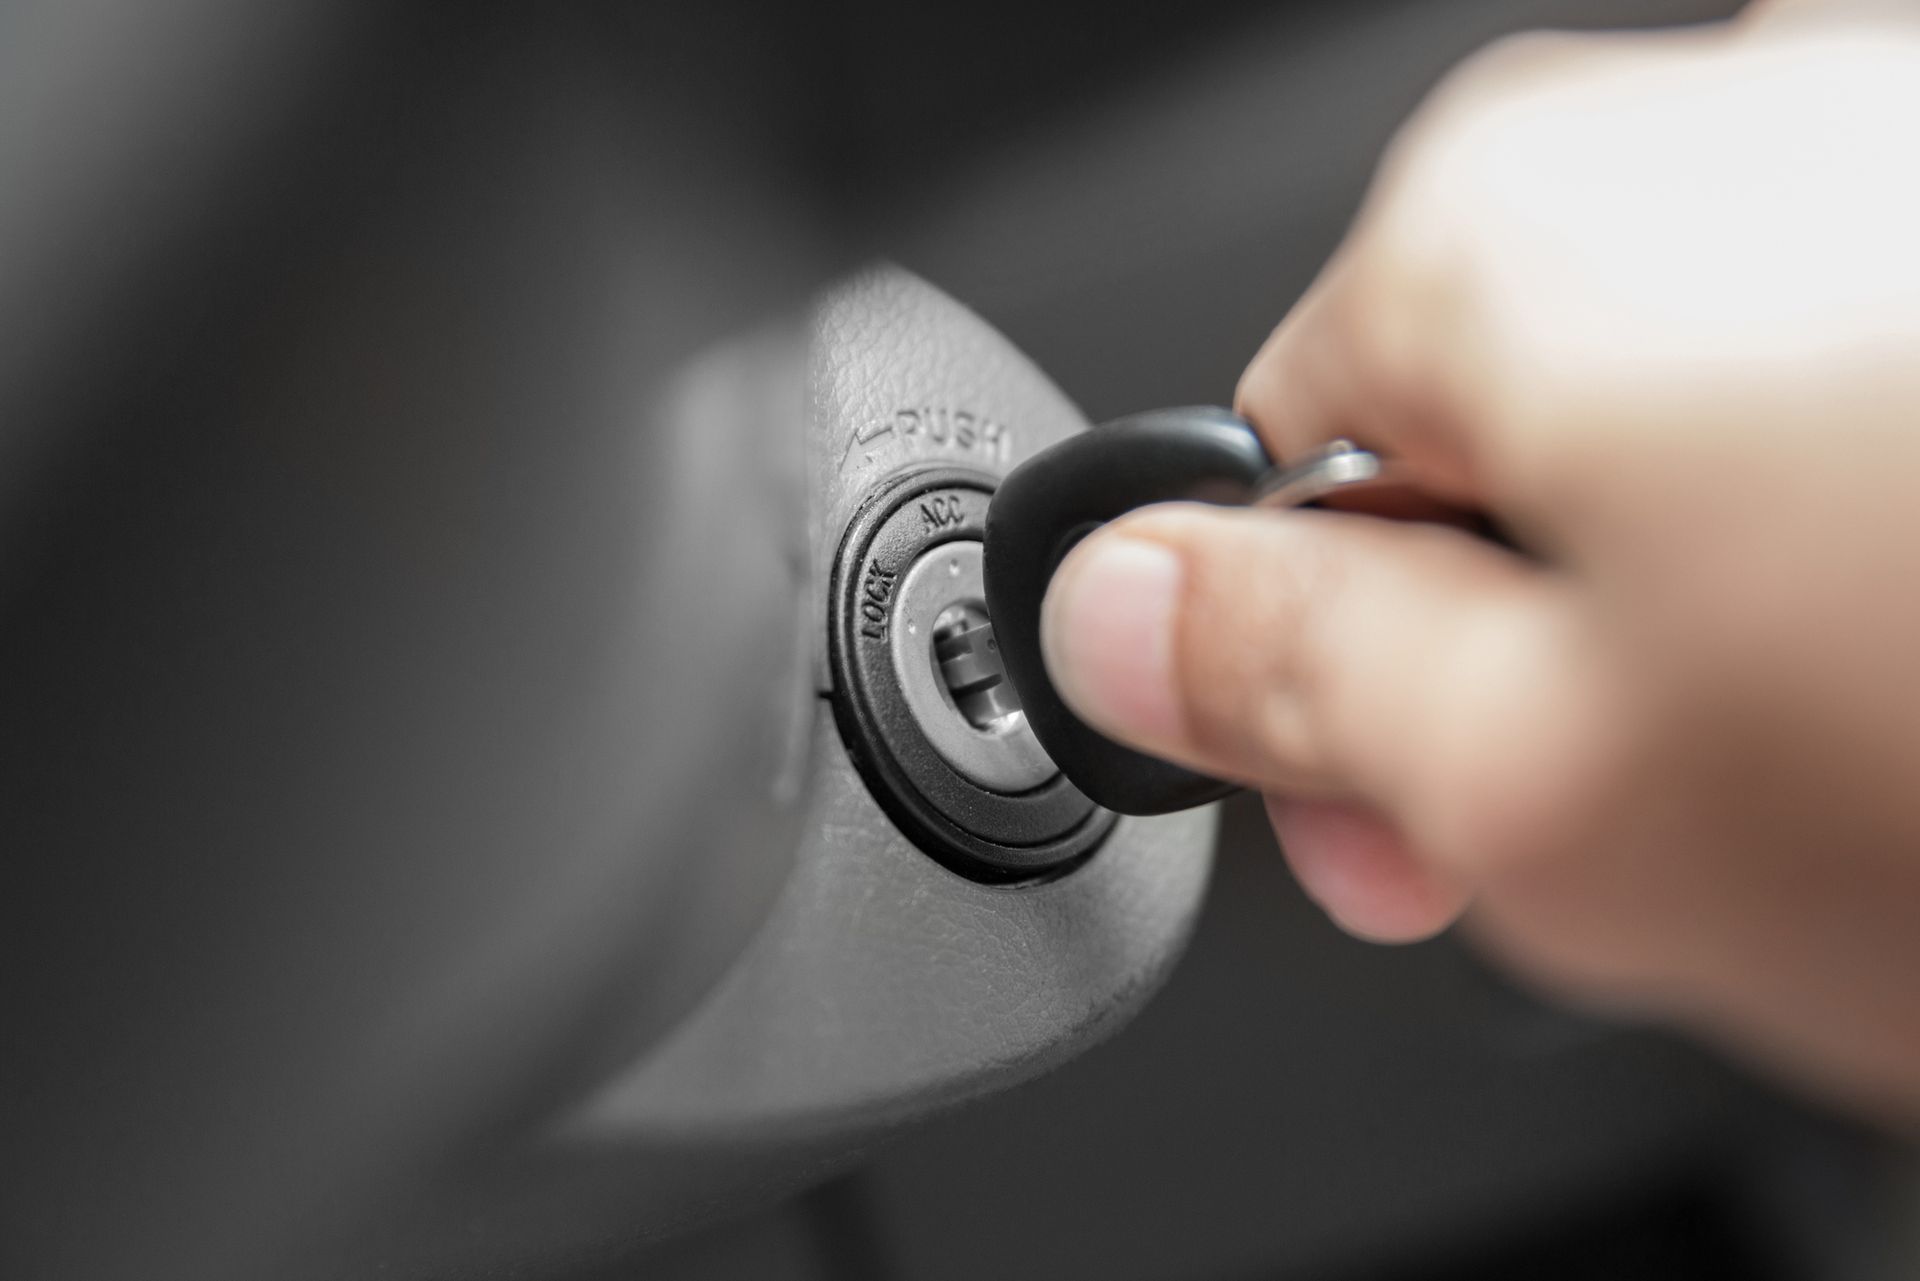 Ignition Services in Houston, TX | A1 ABC Lock and Safe